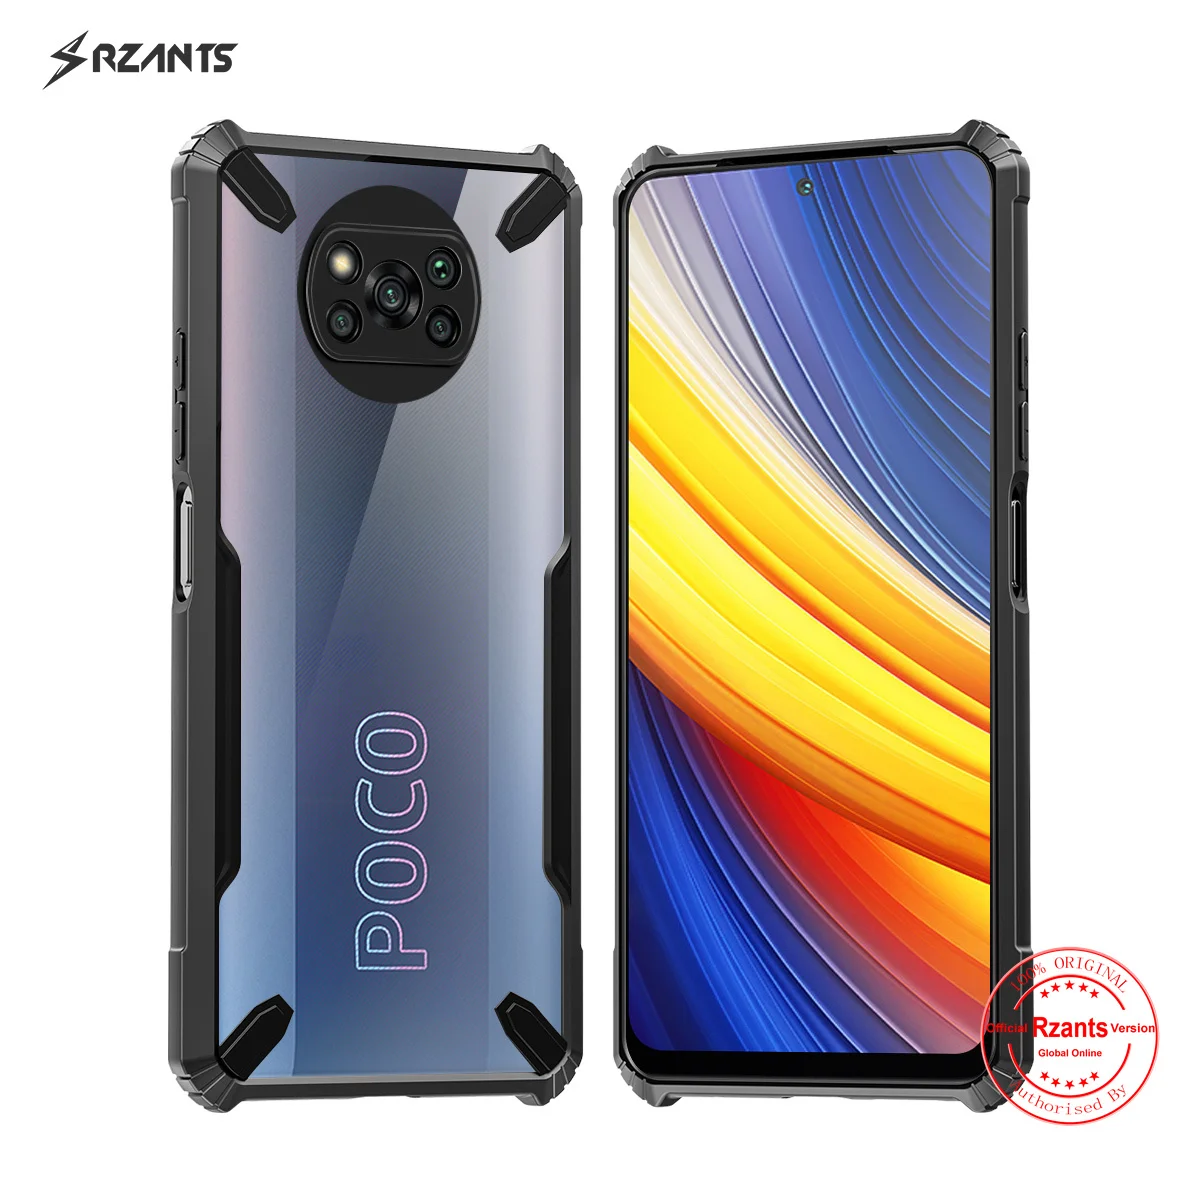 

Rzants For Xiaomi POCO X3 Pro POCO X3 NFC Full Clear Case Crystal Cover Ultra Slim Thin Casing Camera Protection Phone Shell